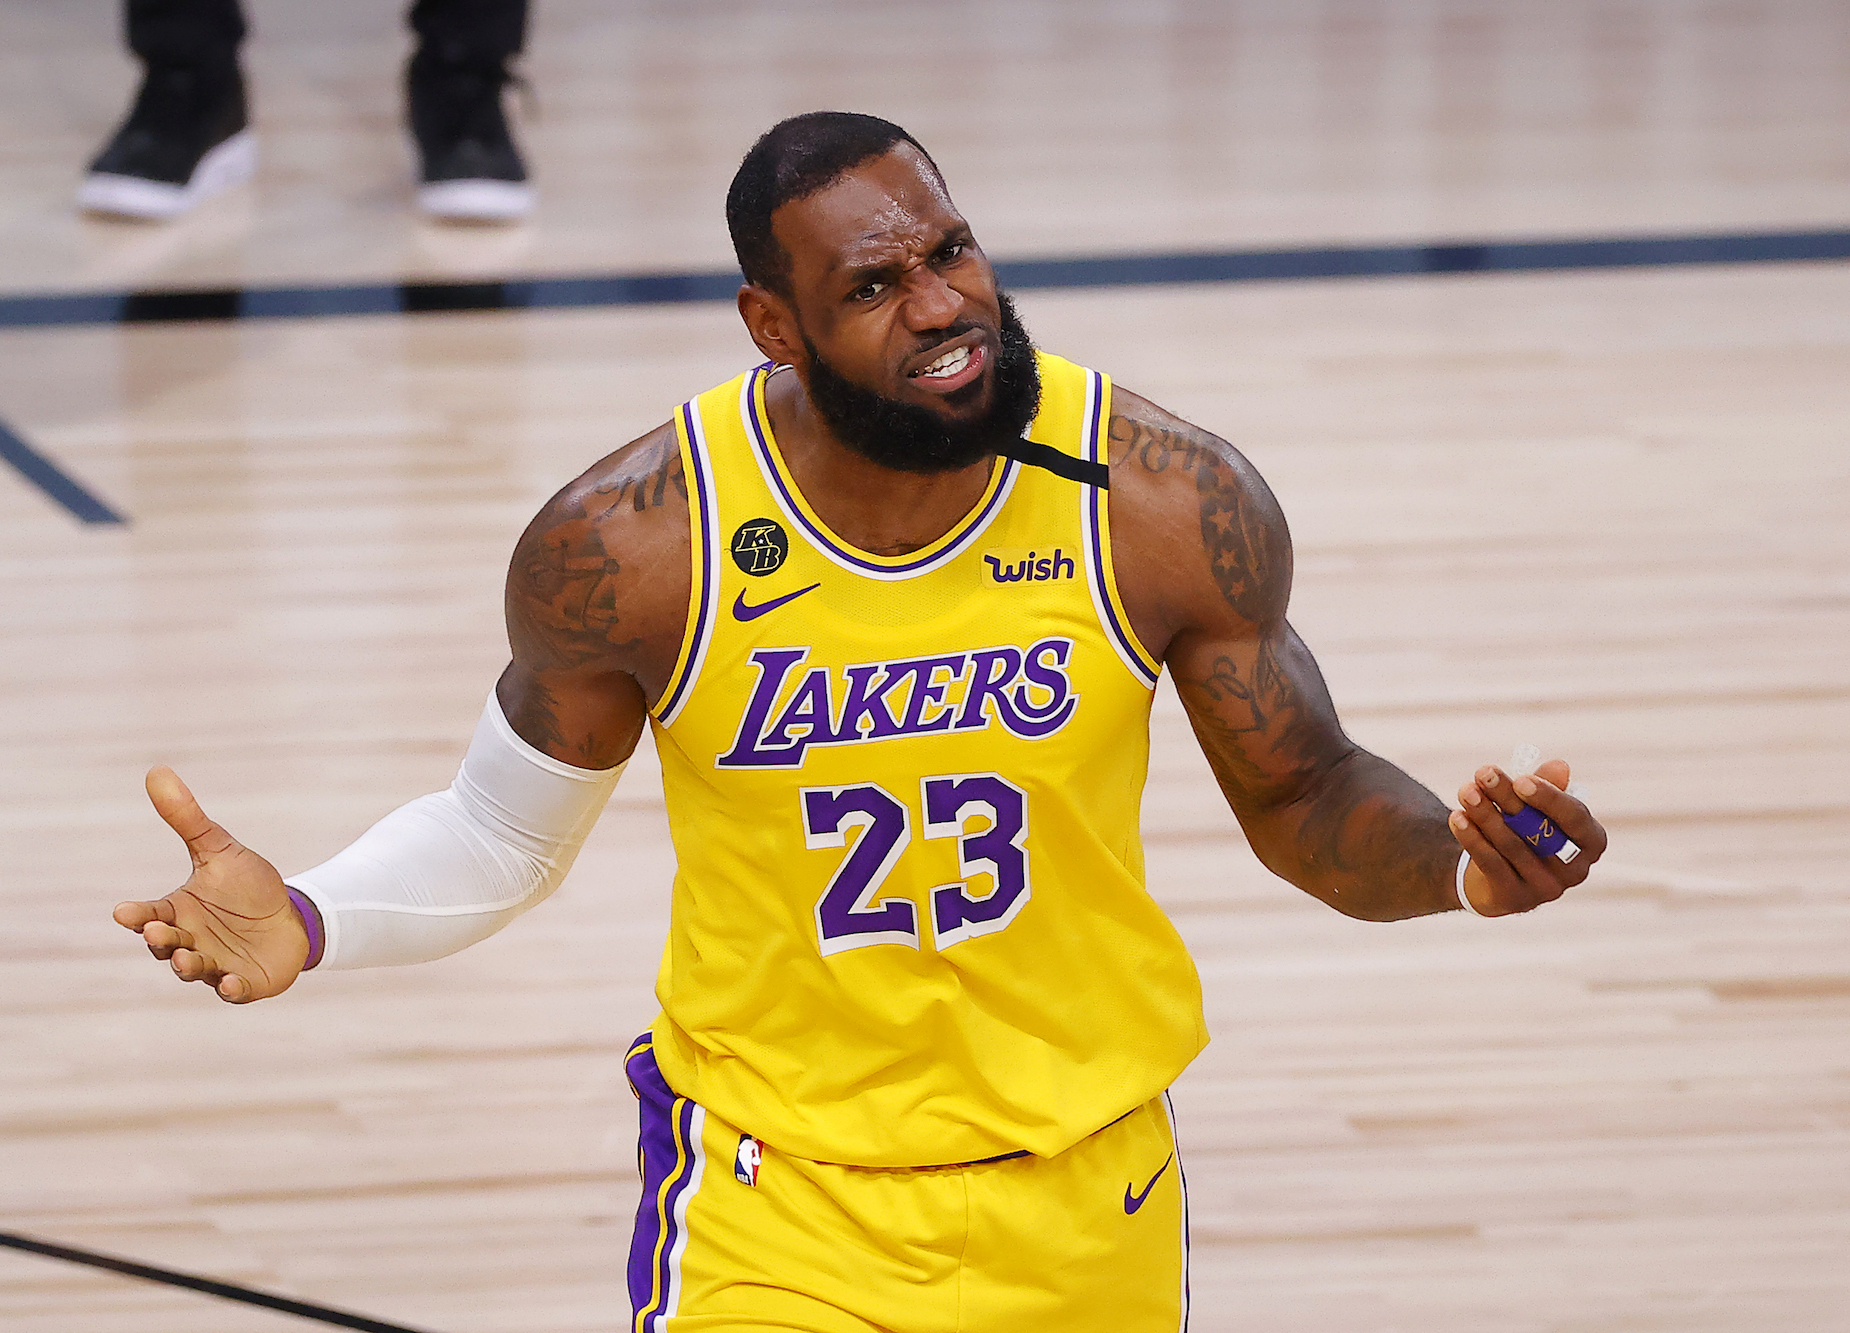 Ahead of Game 4 of the NBA Finals, LeBron James inspired his Lakers teammates with a simple, two-word text message.